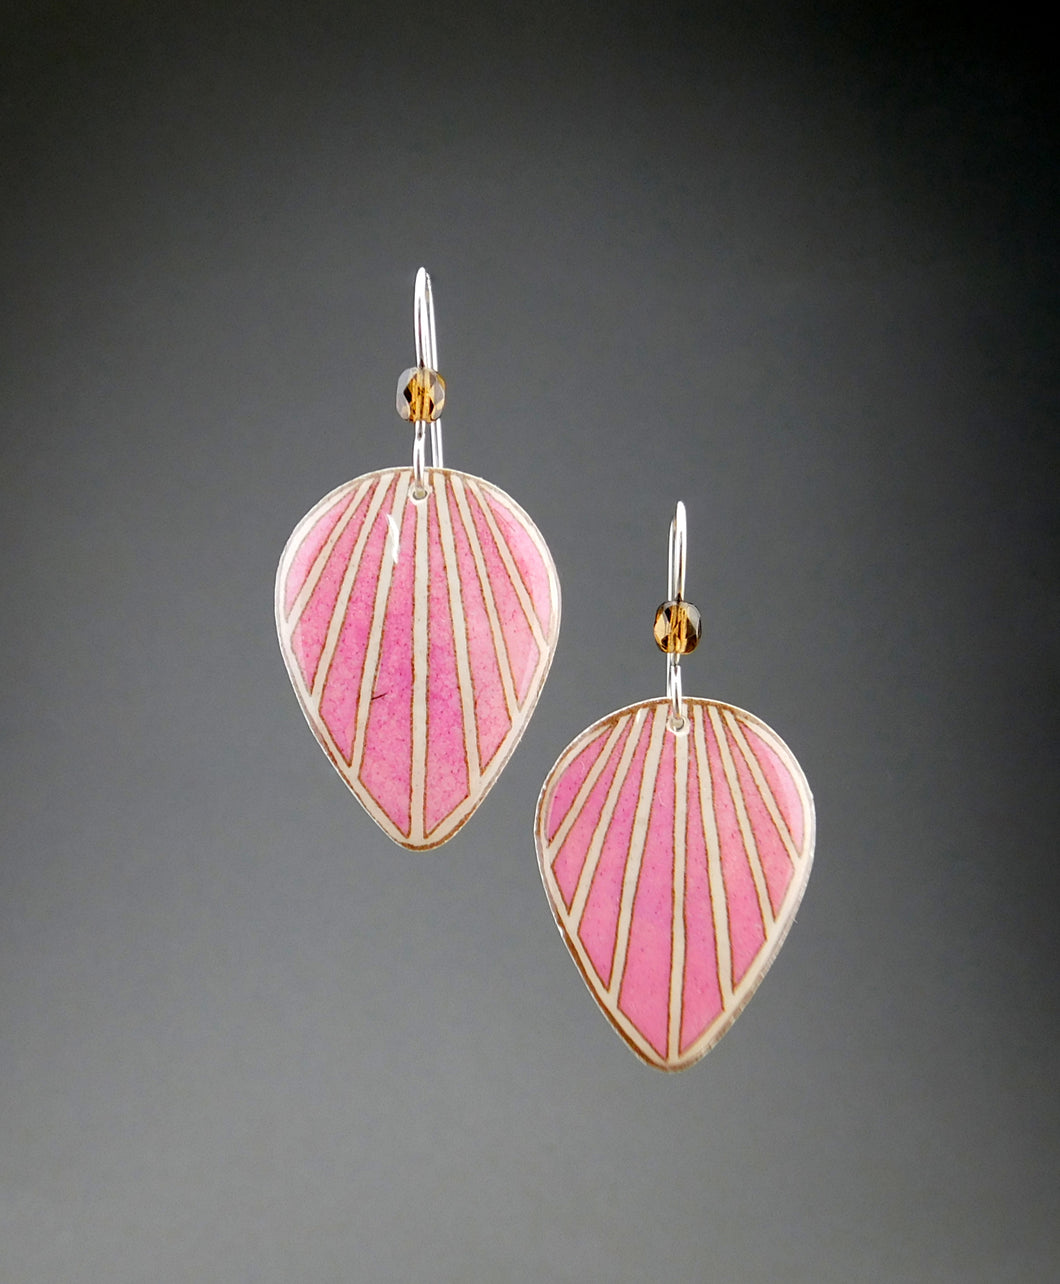 Pink Goose Egg Shell Jewelry - Raydrop Earrings - Large